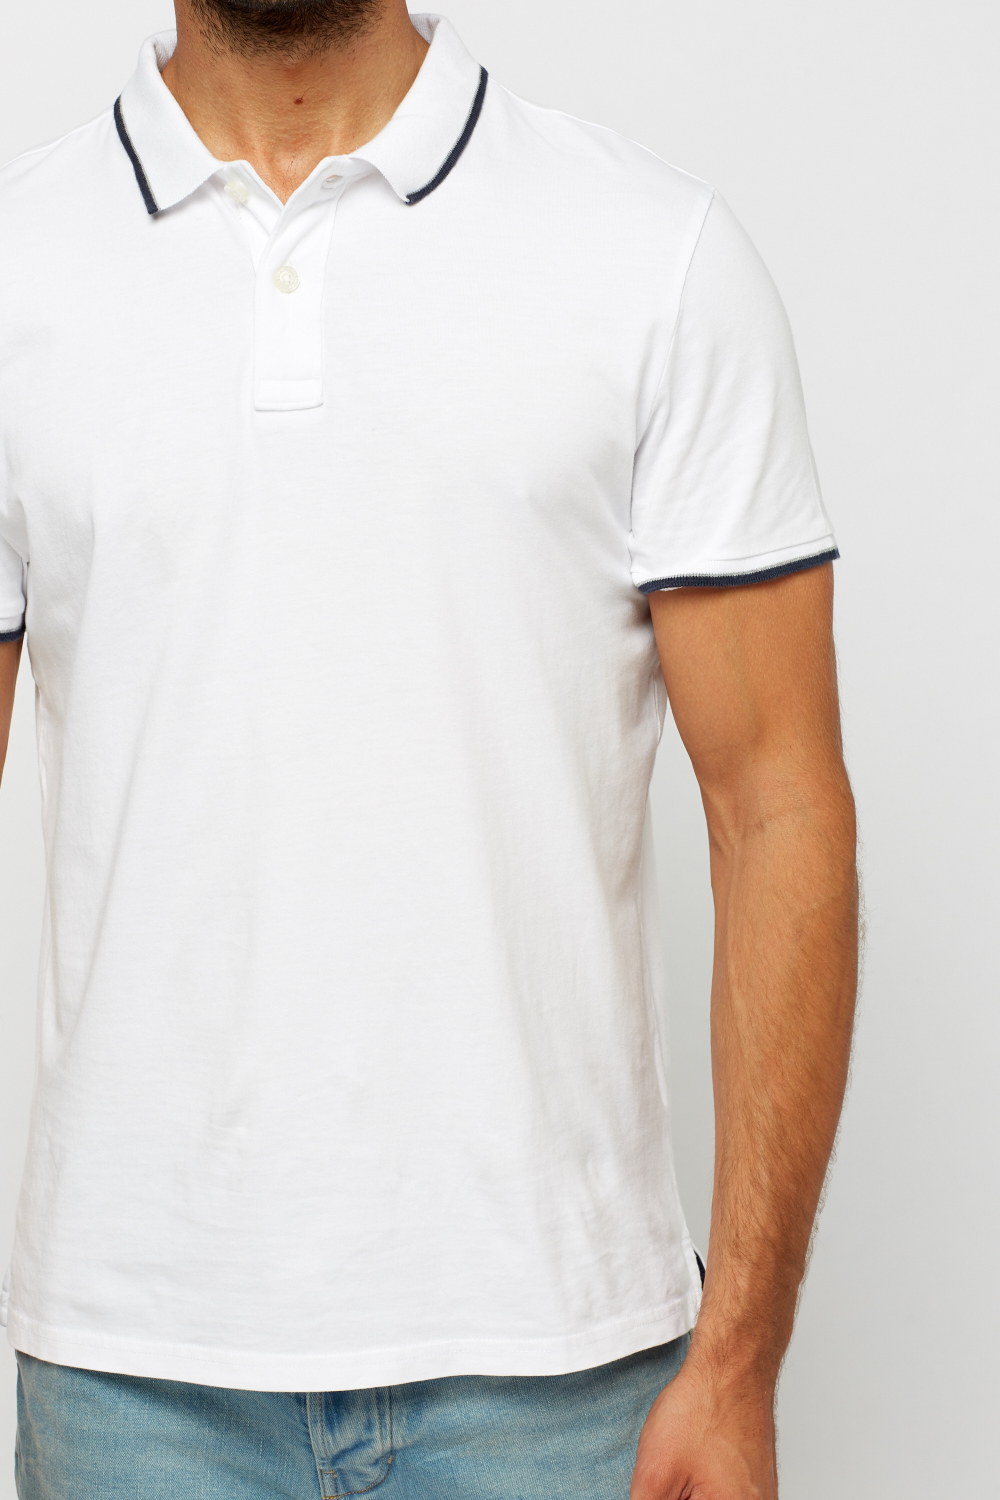 White Polo T Shirt Just £5